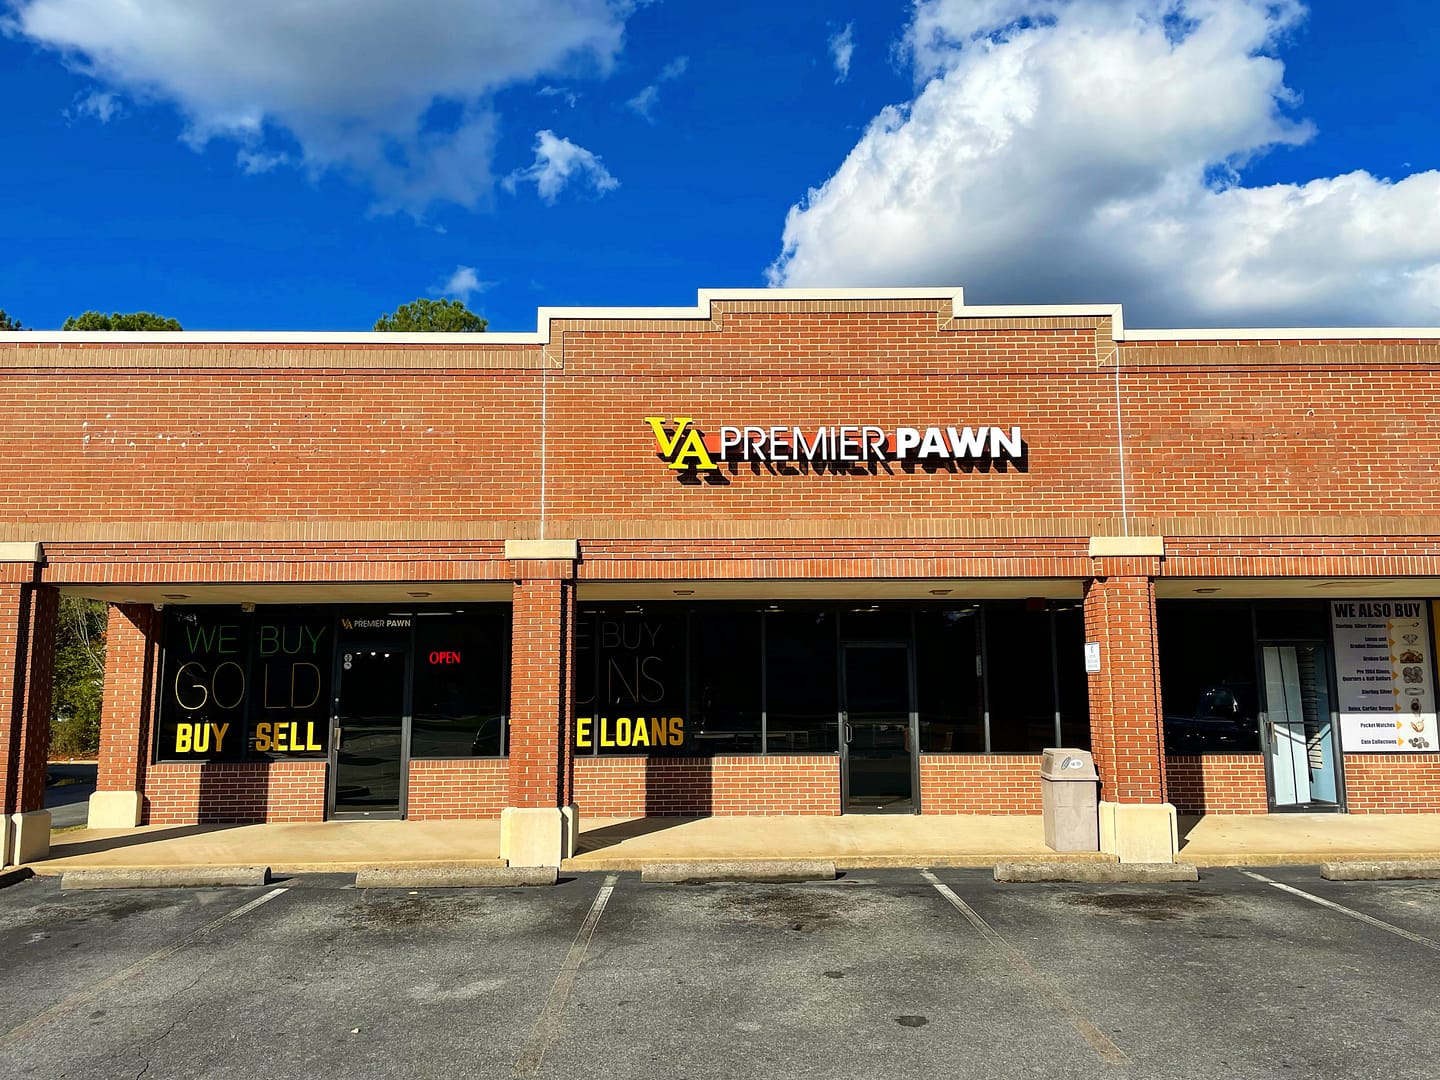 What to Expect When You Visit VA Premier Pawn